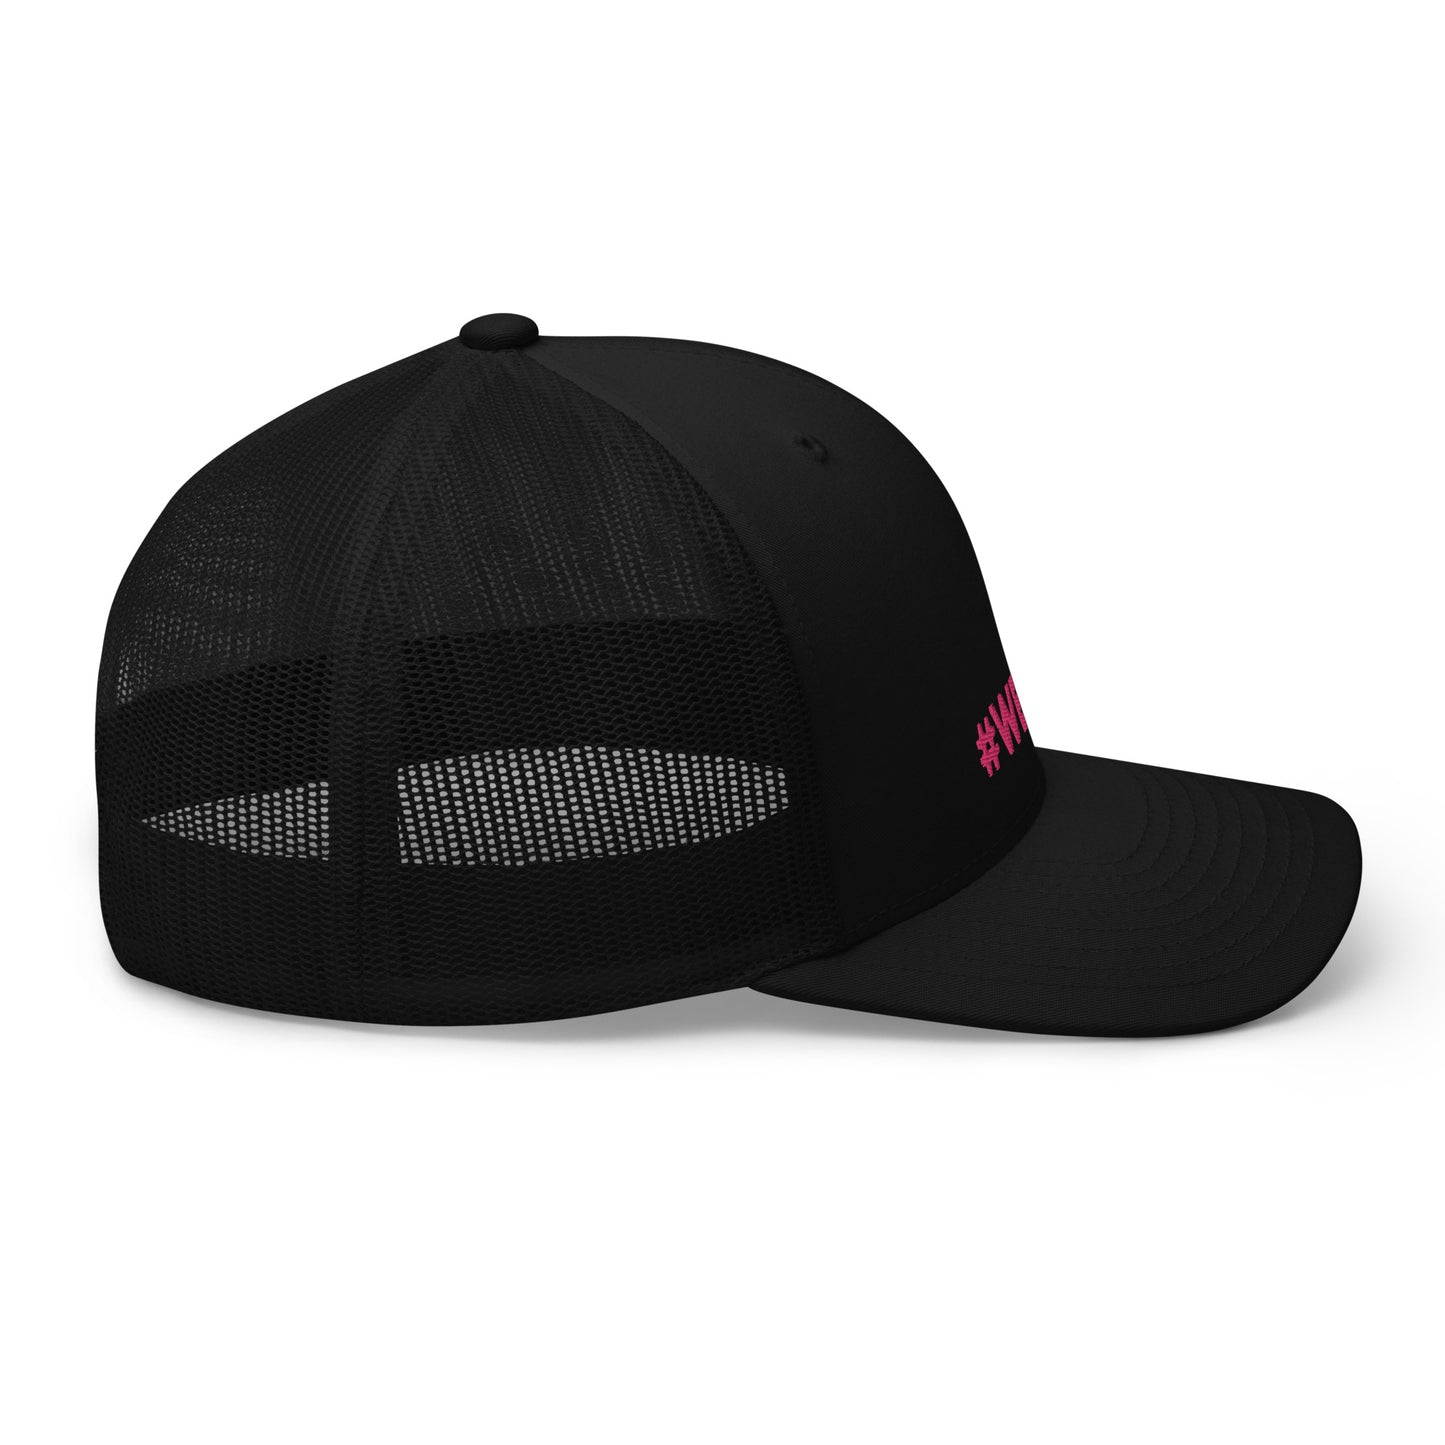 #WEIRDO | Are you a weirdo, looking for some weirdo shit to wear? Check out our funny hats for weird people! This retro trucker cap with pink #WEIRDO embroidery is perfect for weird people!